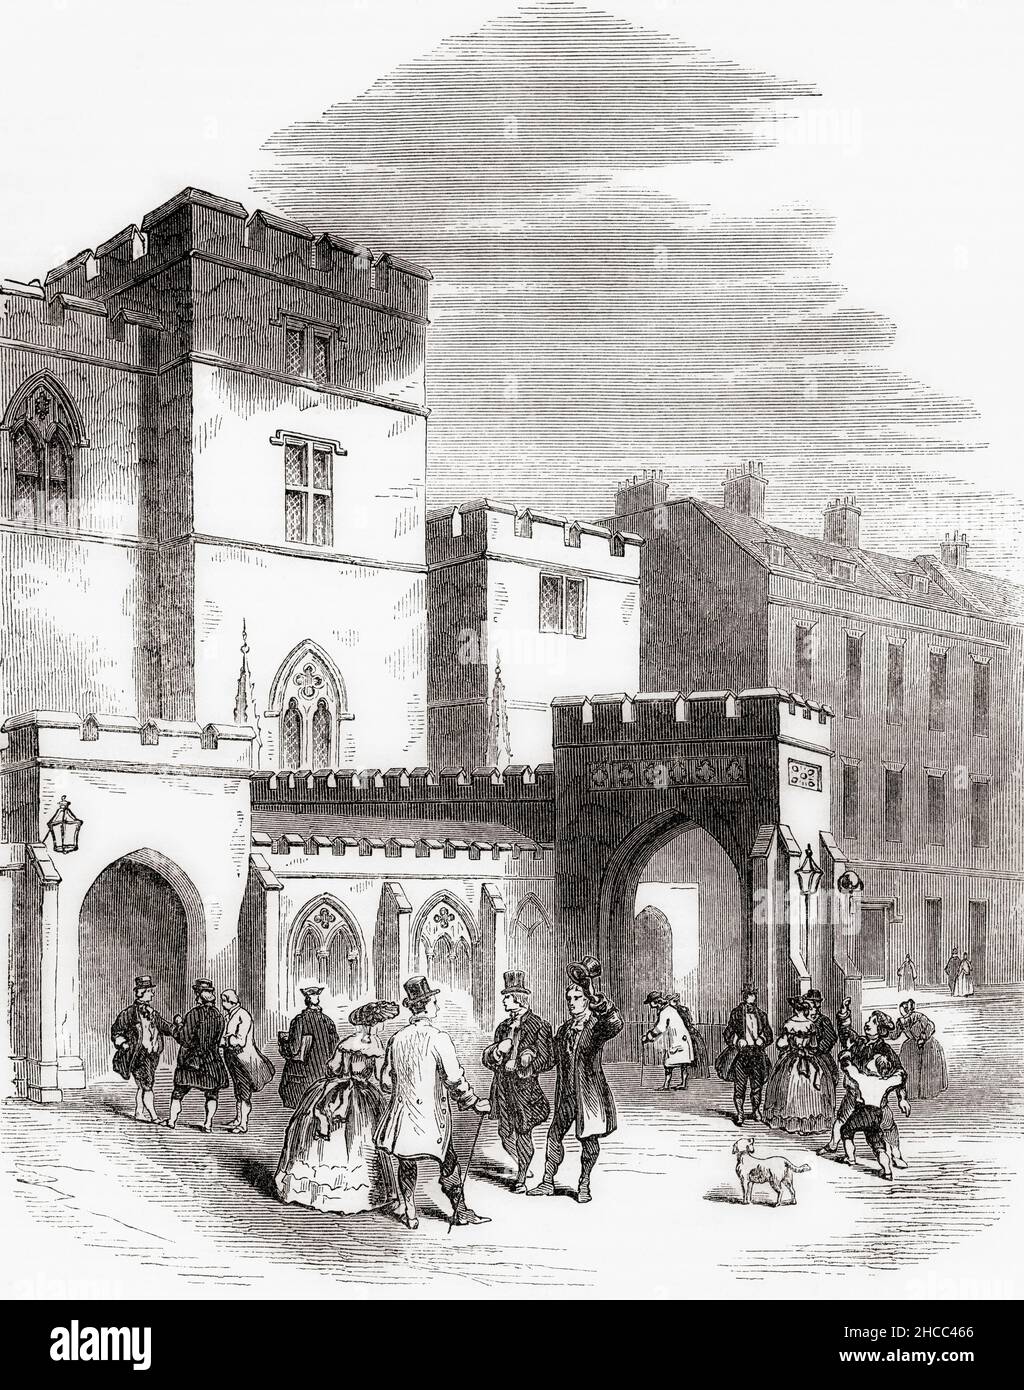 Entrance to the old House of Lords, London, England.  From Cassell's Illustrated History of England, published c.1890. Stock Photo